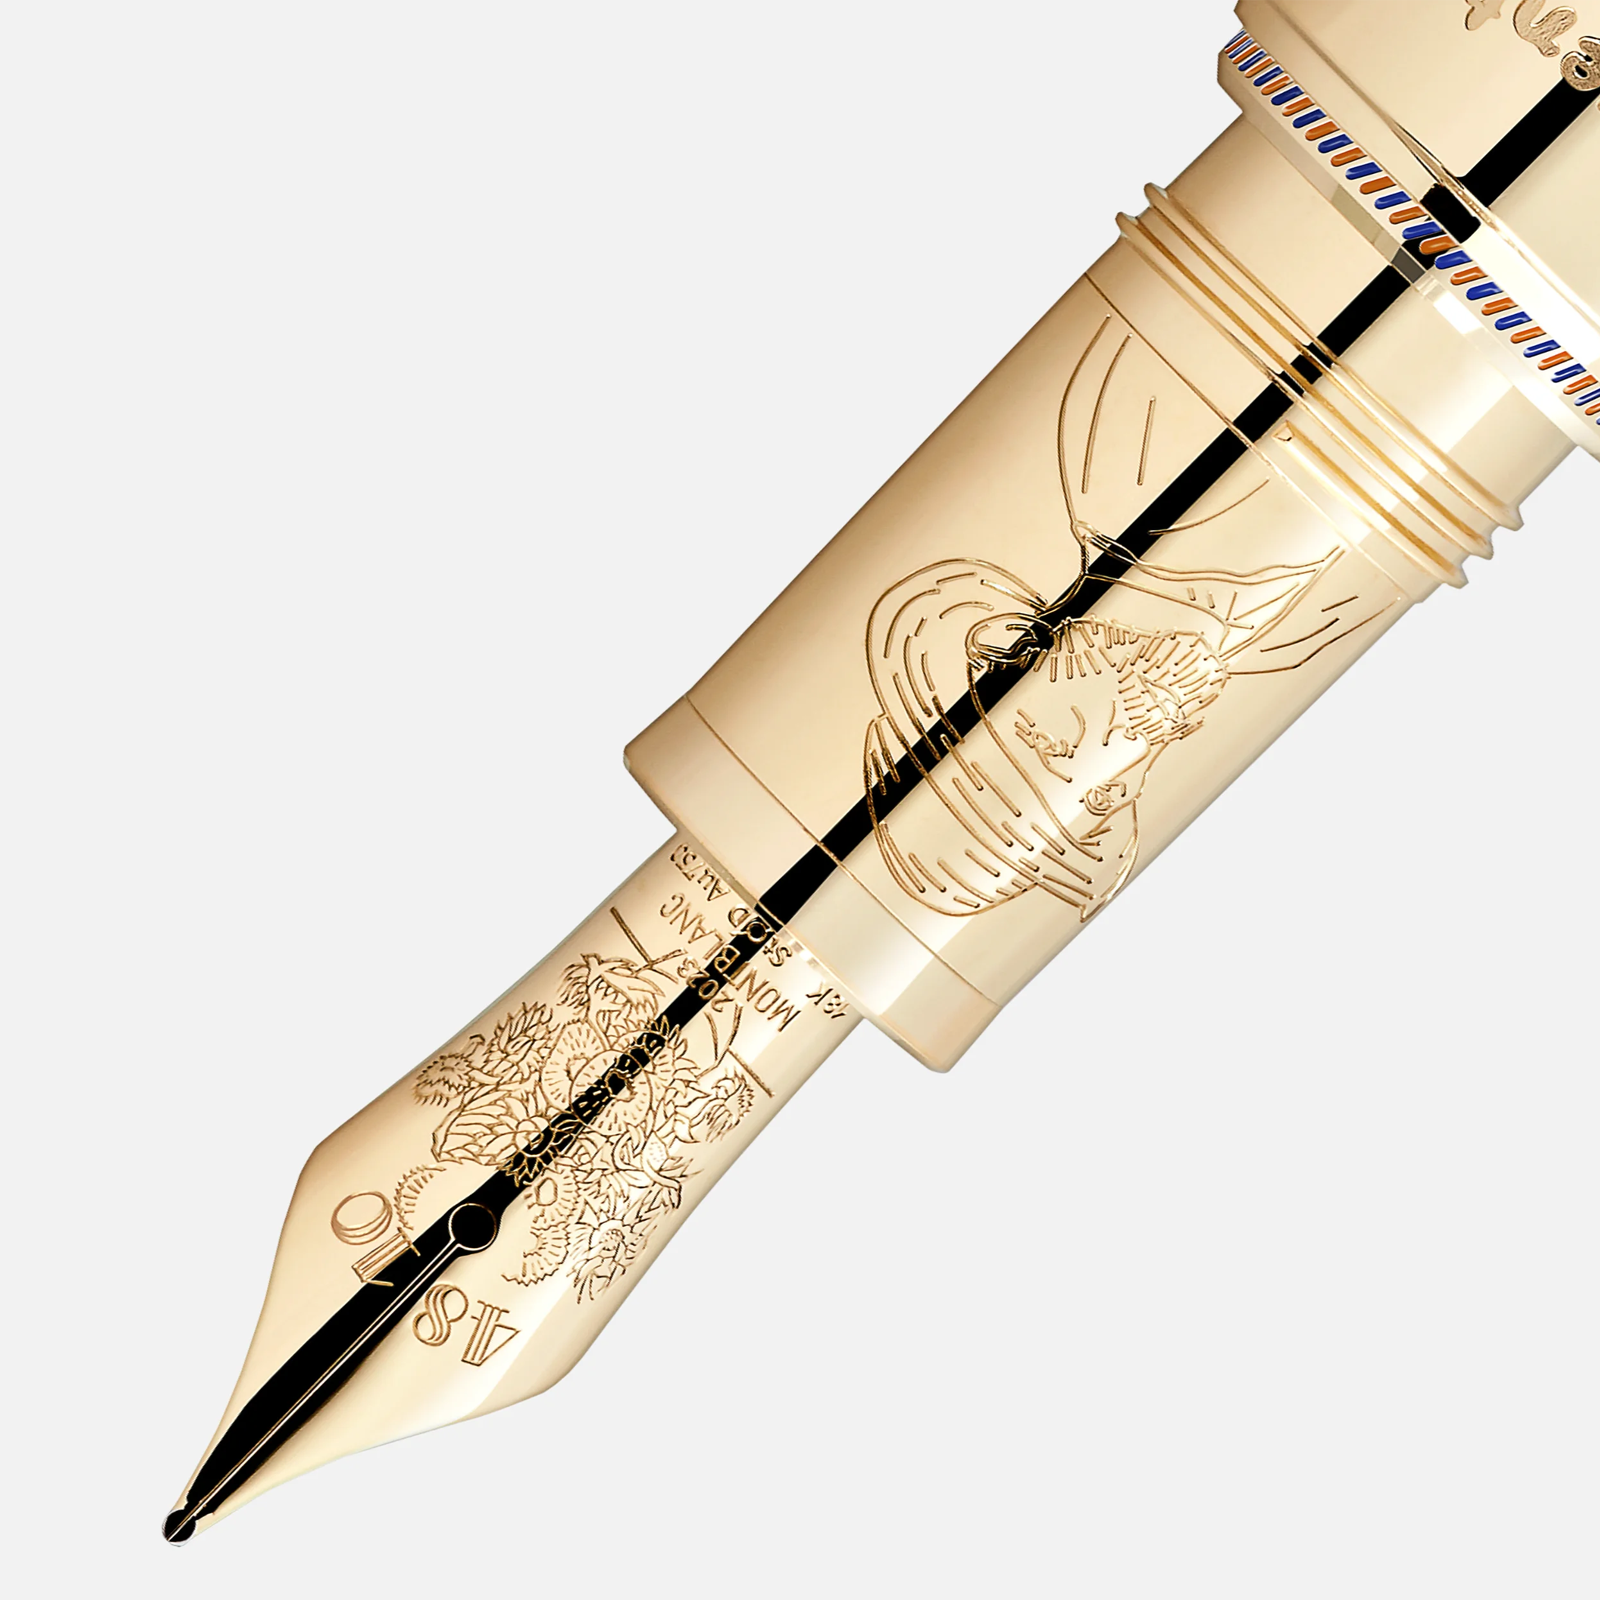 Montblanc Meisterstuck : Master Strokes From A Signature Brand